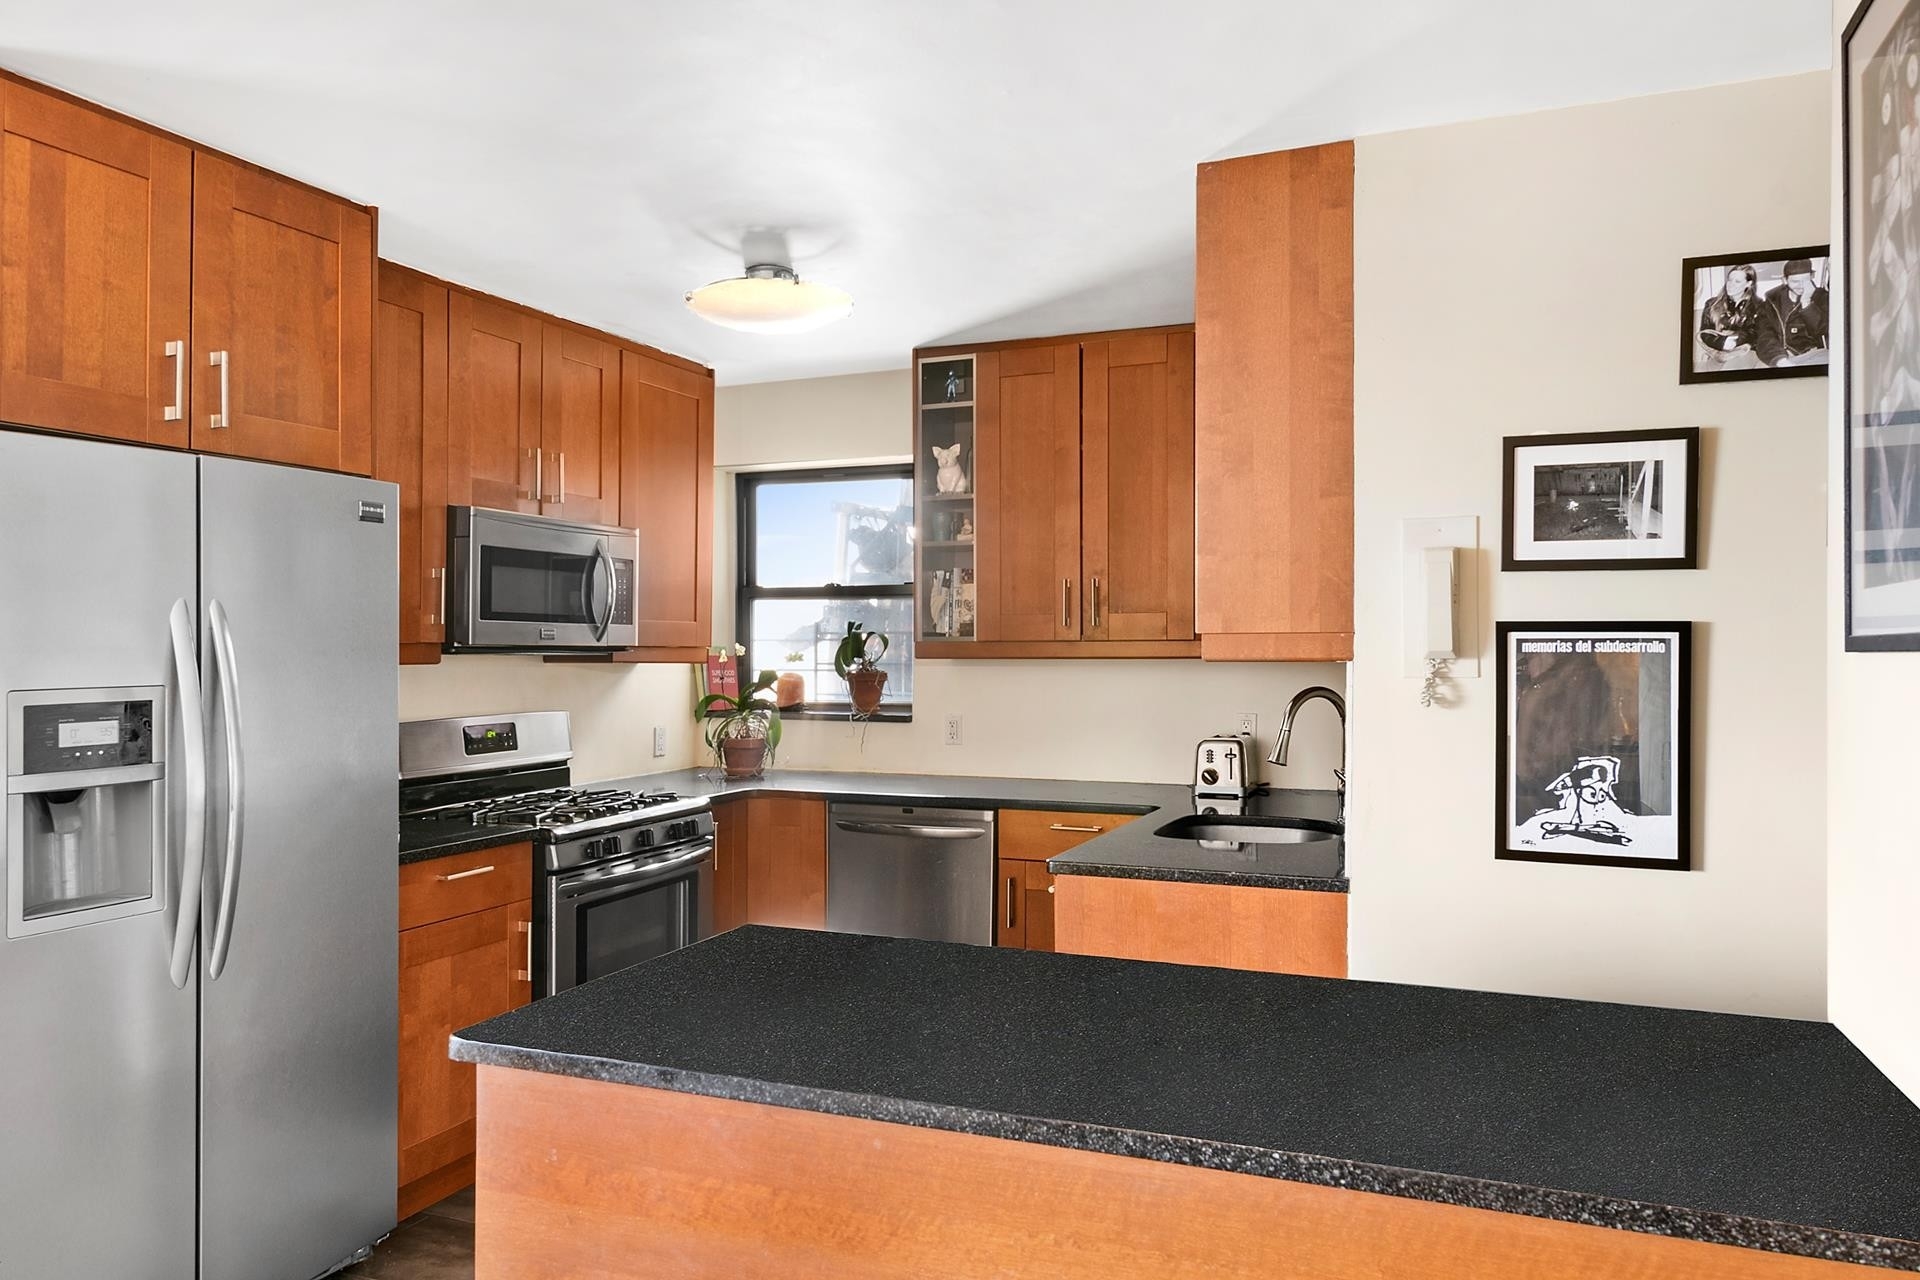 Property at The Executive Towers, 1020 GRAND , 22P Bronx